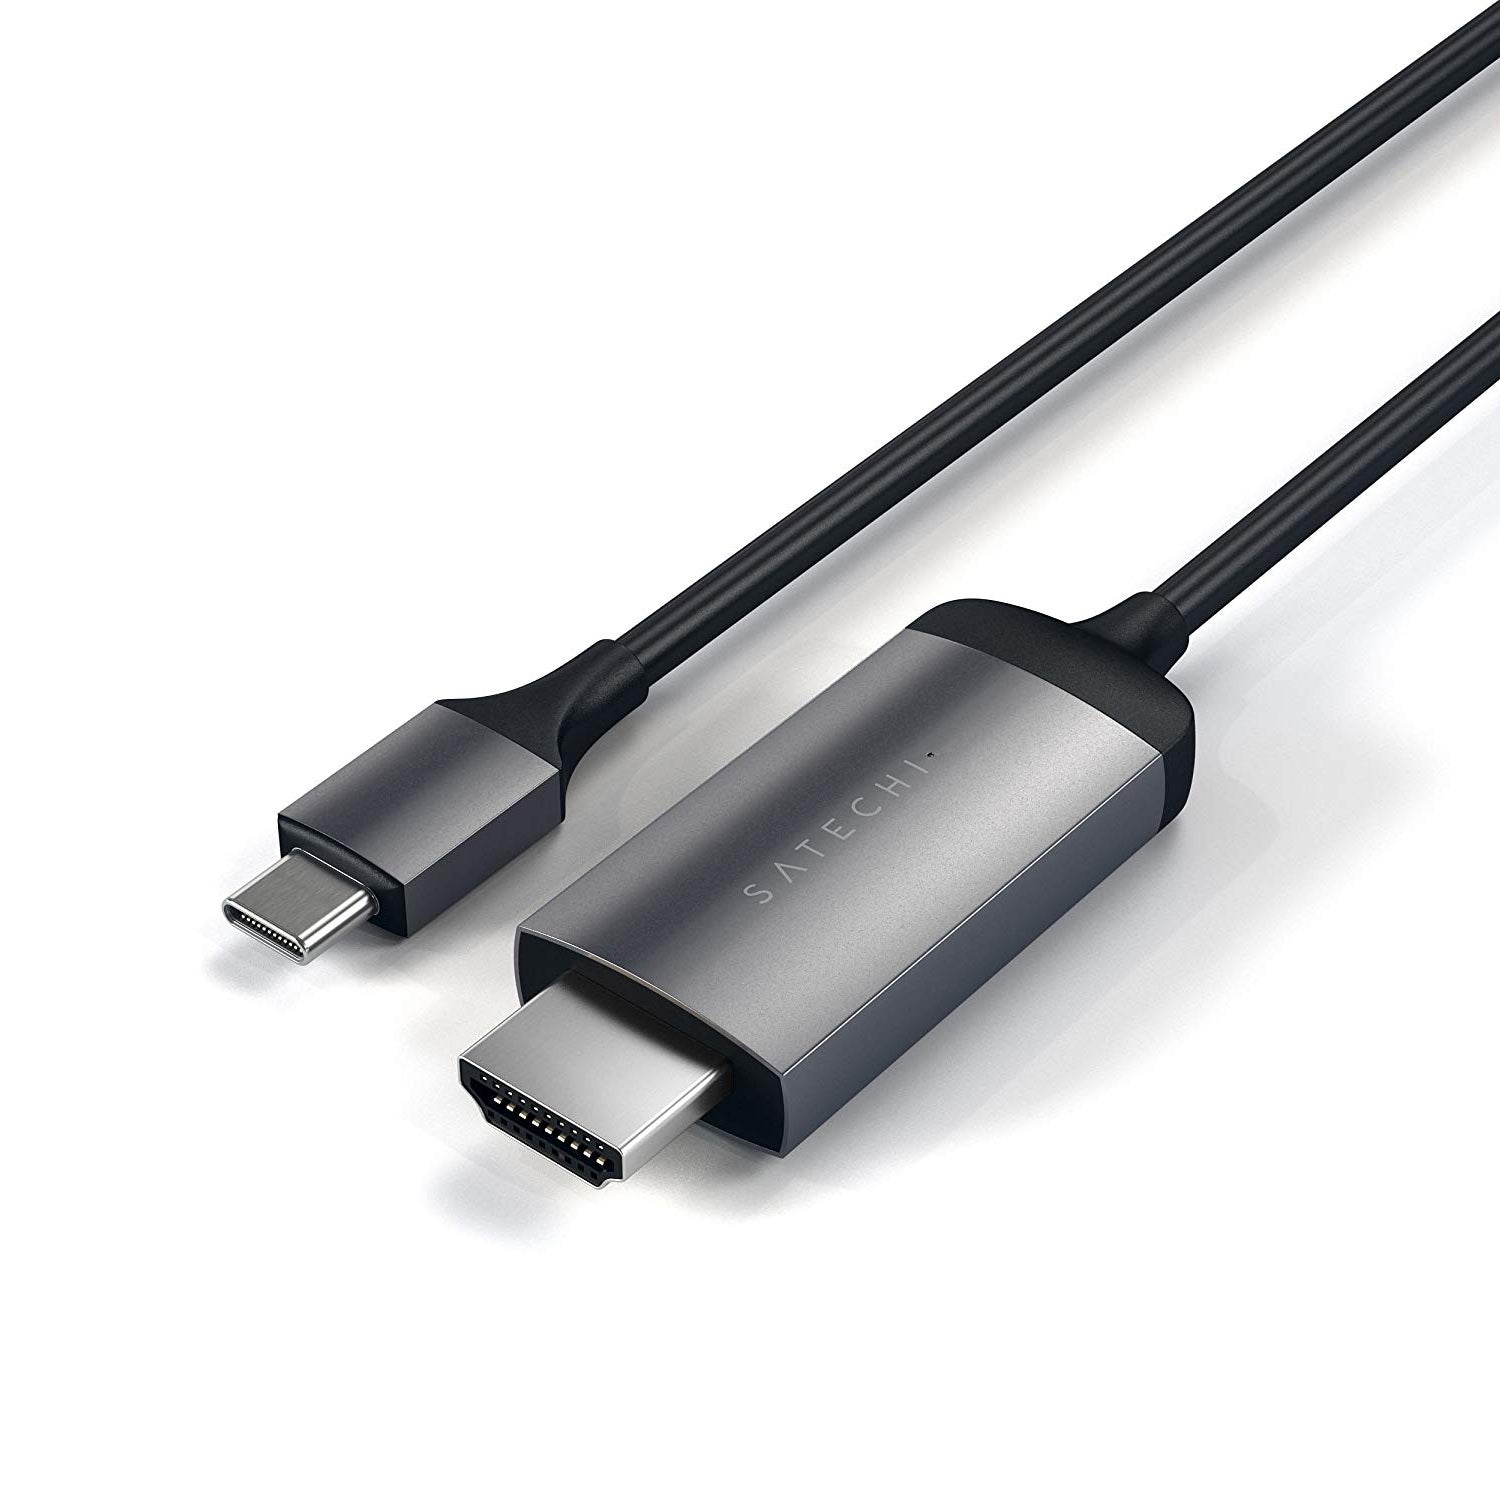 Satechi Aluminum Type-C to HDMI Cable 4K 60Hz - Space Gray